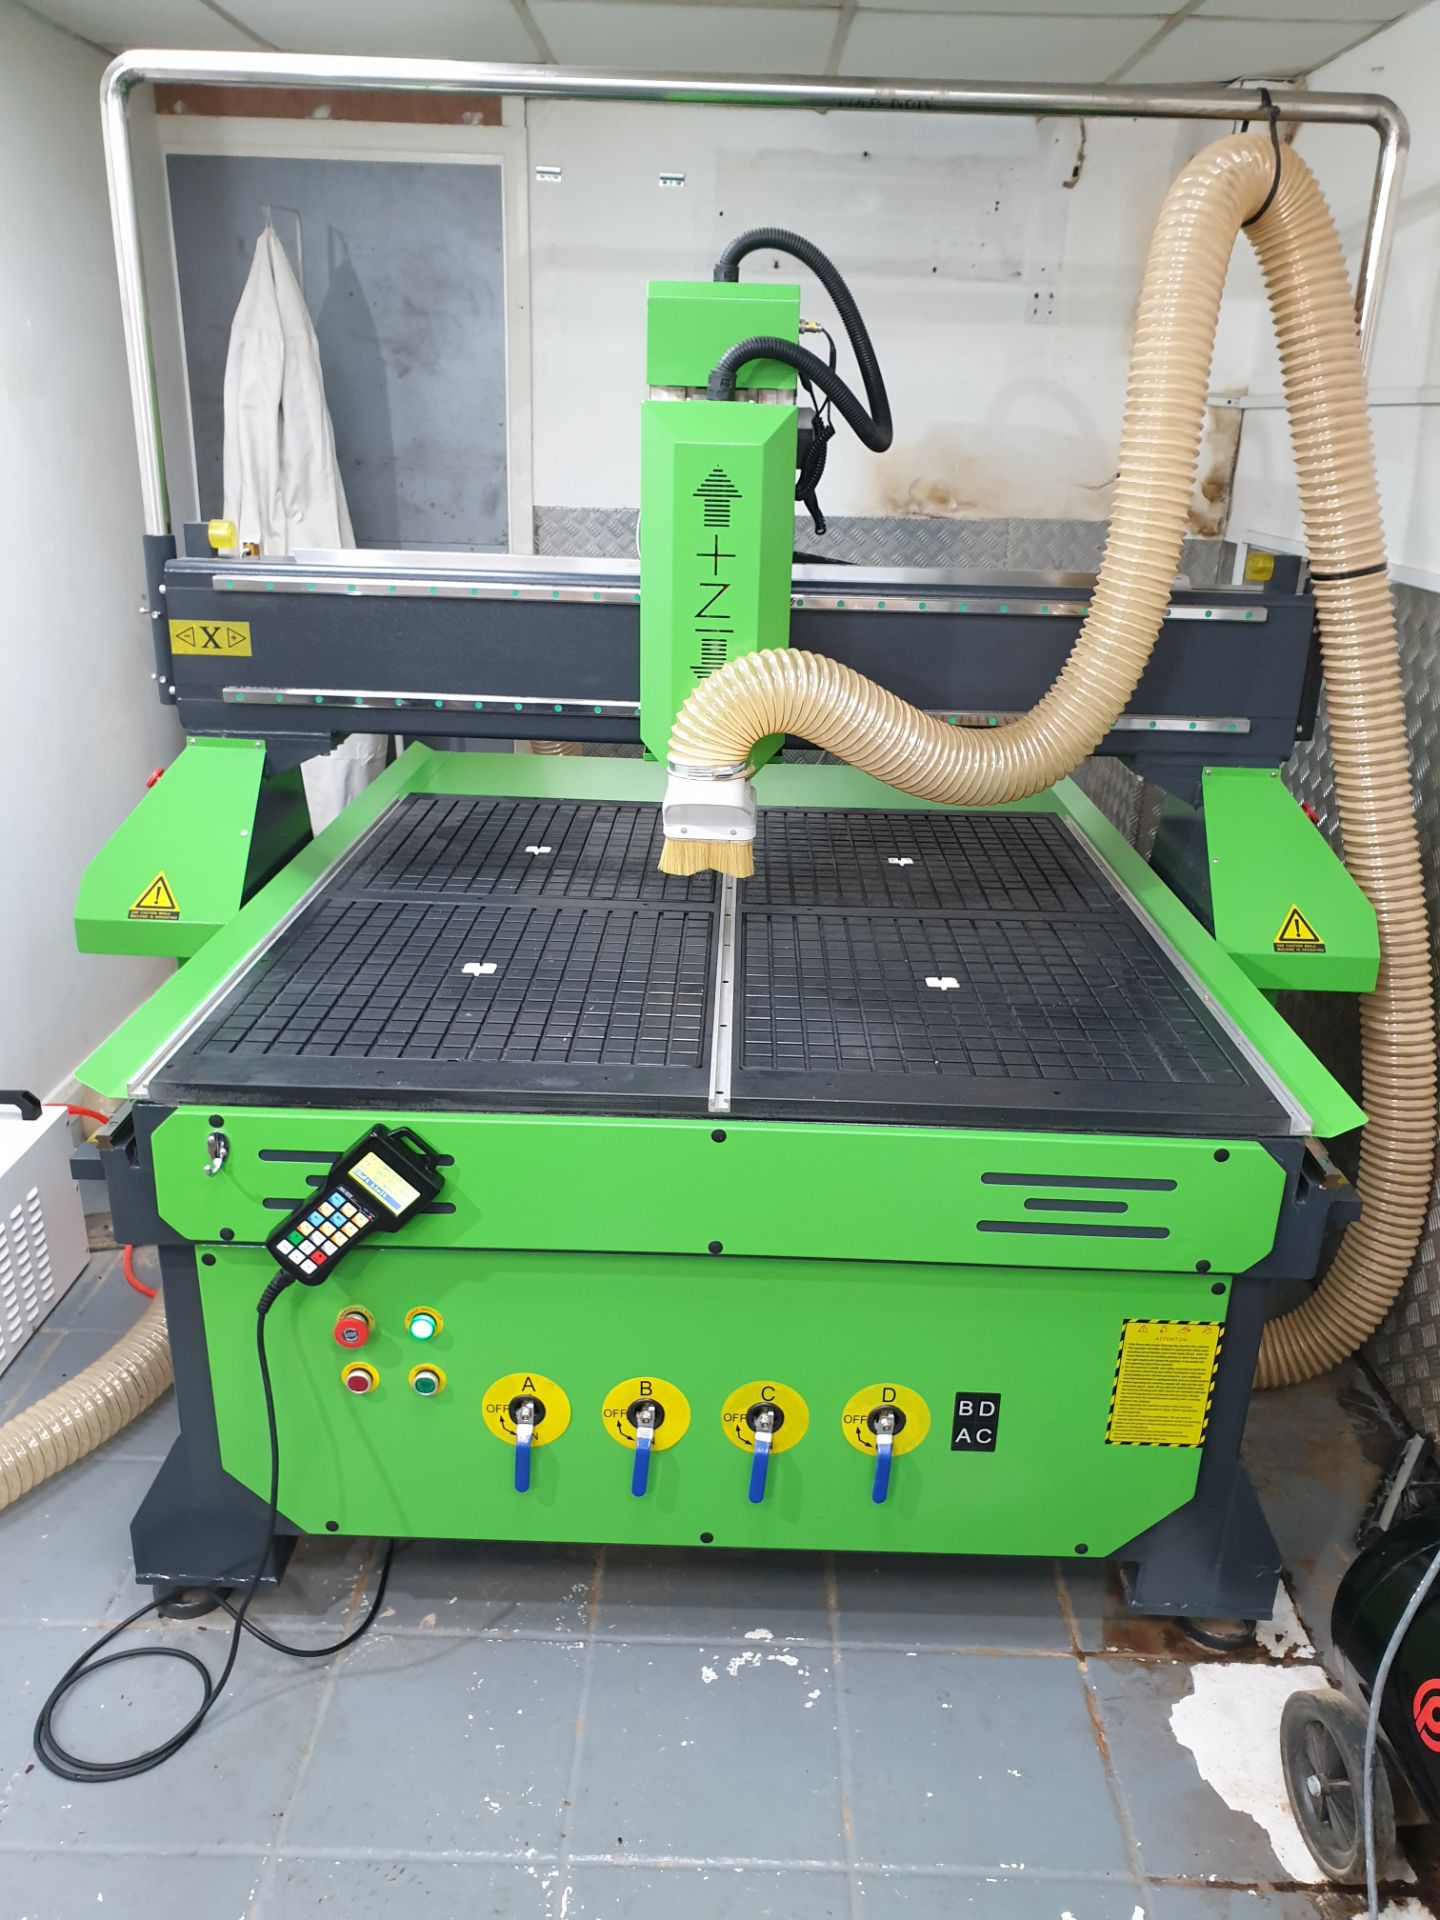 CNC Router Single Phase - Spartan 1313 - Image 6 of 9